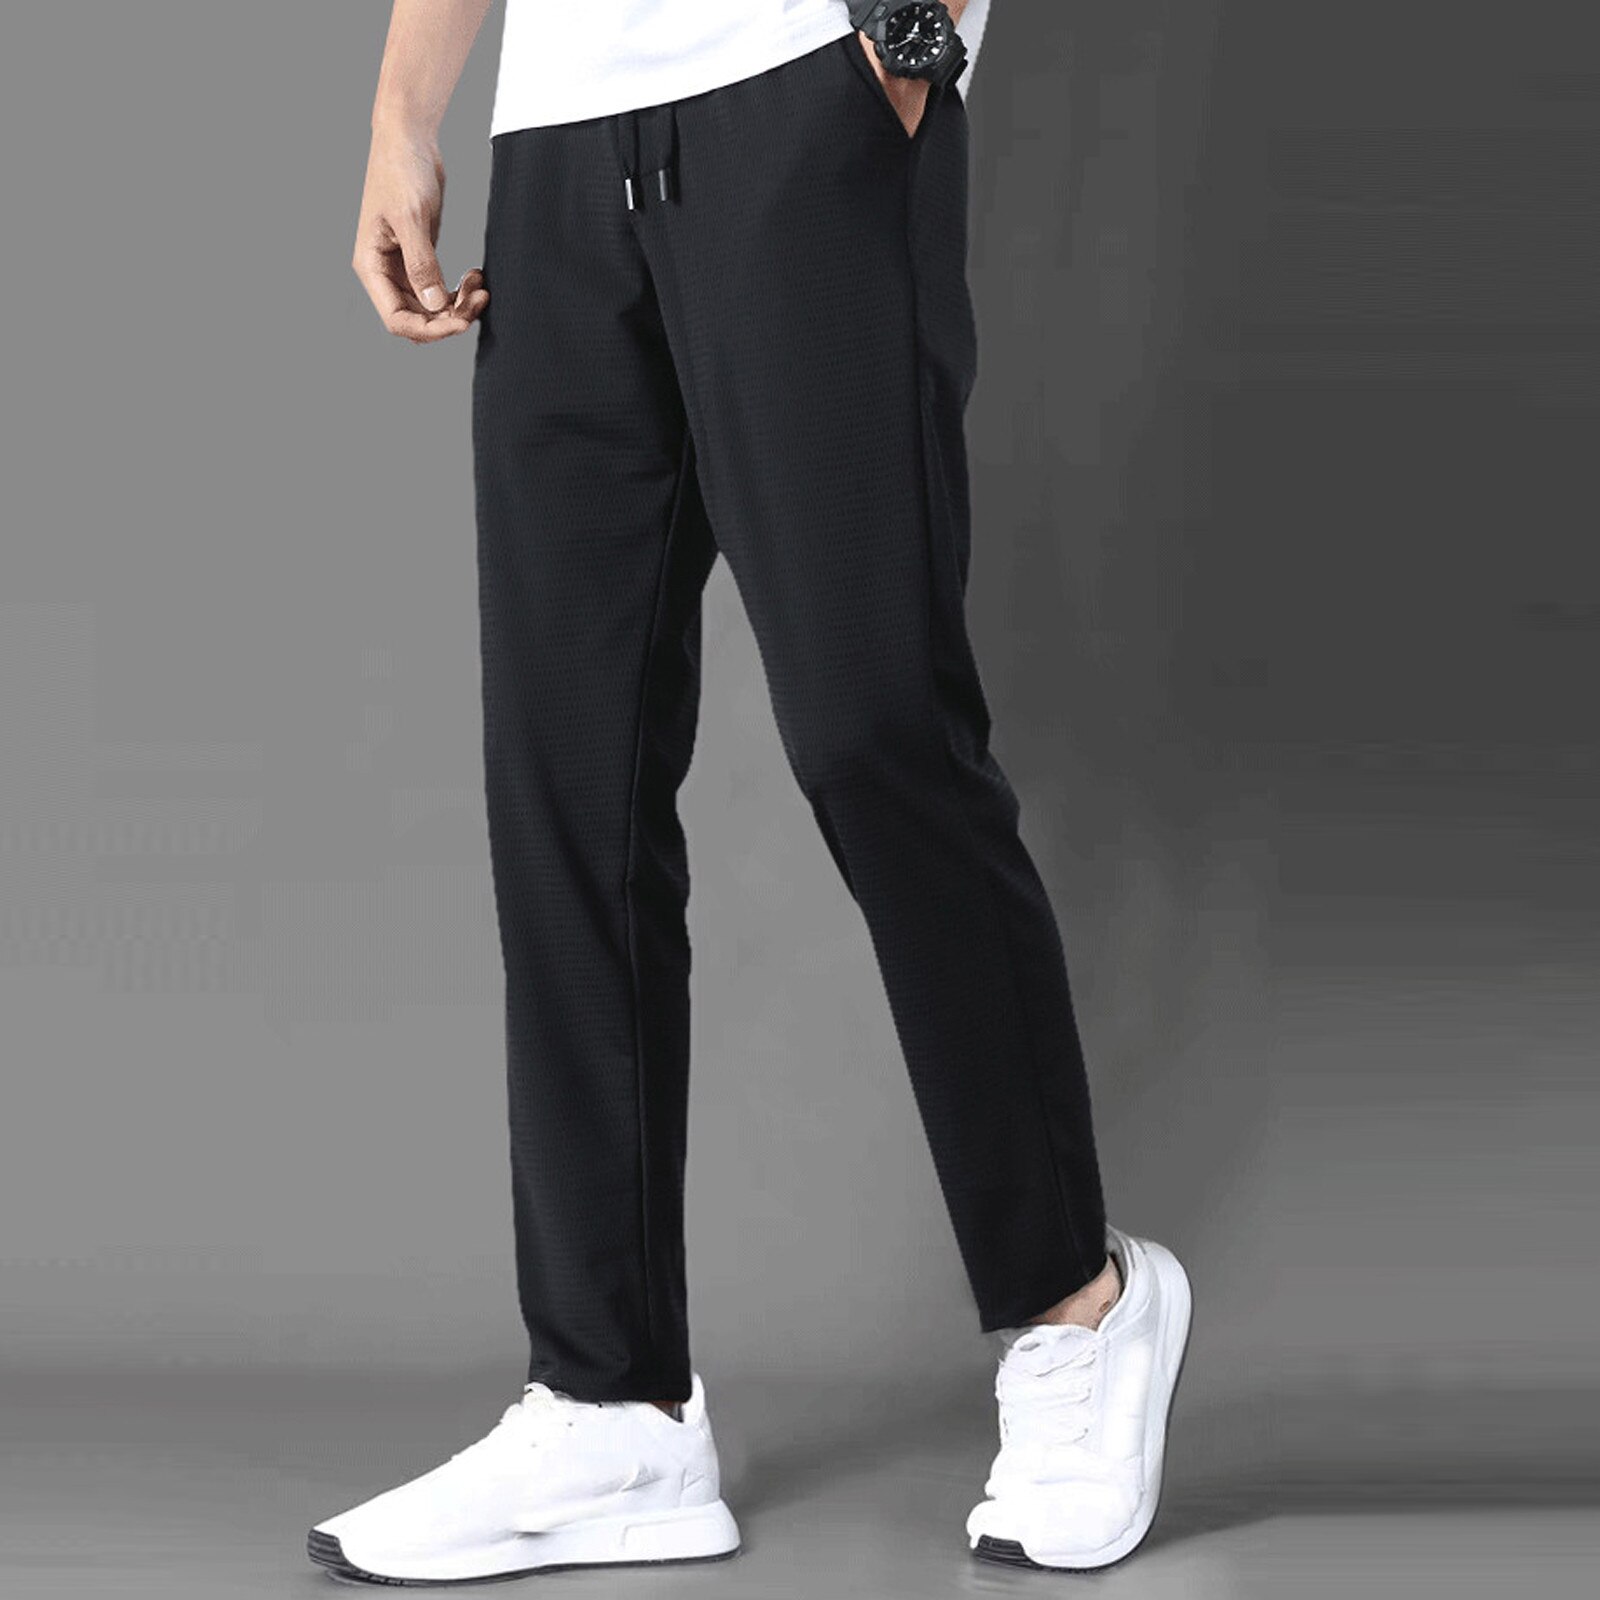 New summer high elastic ice silk pants men's thin breathable loose mesh quick-drying casual sports trousers Lightweight pants